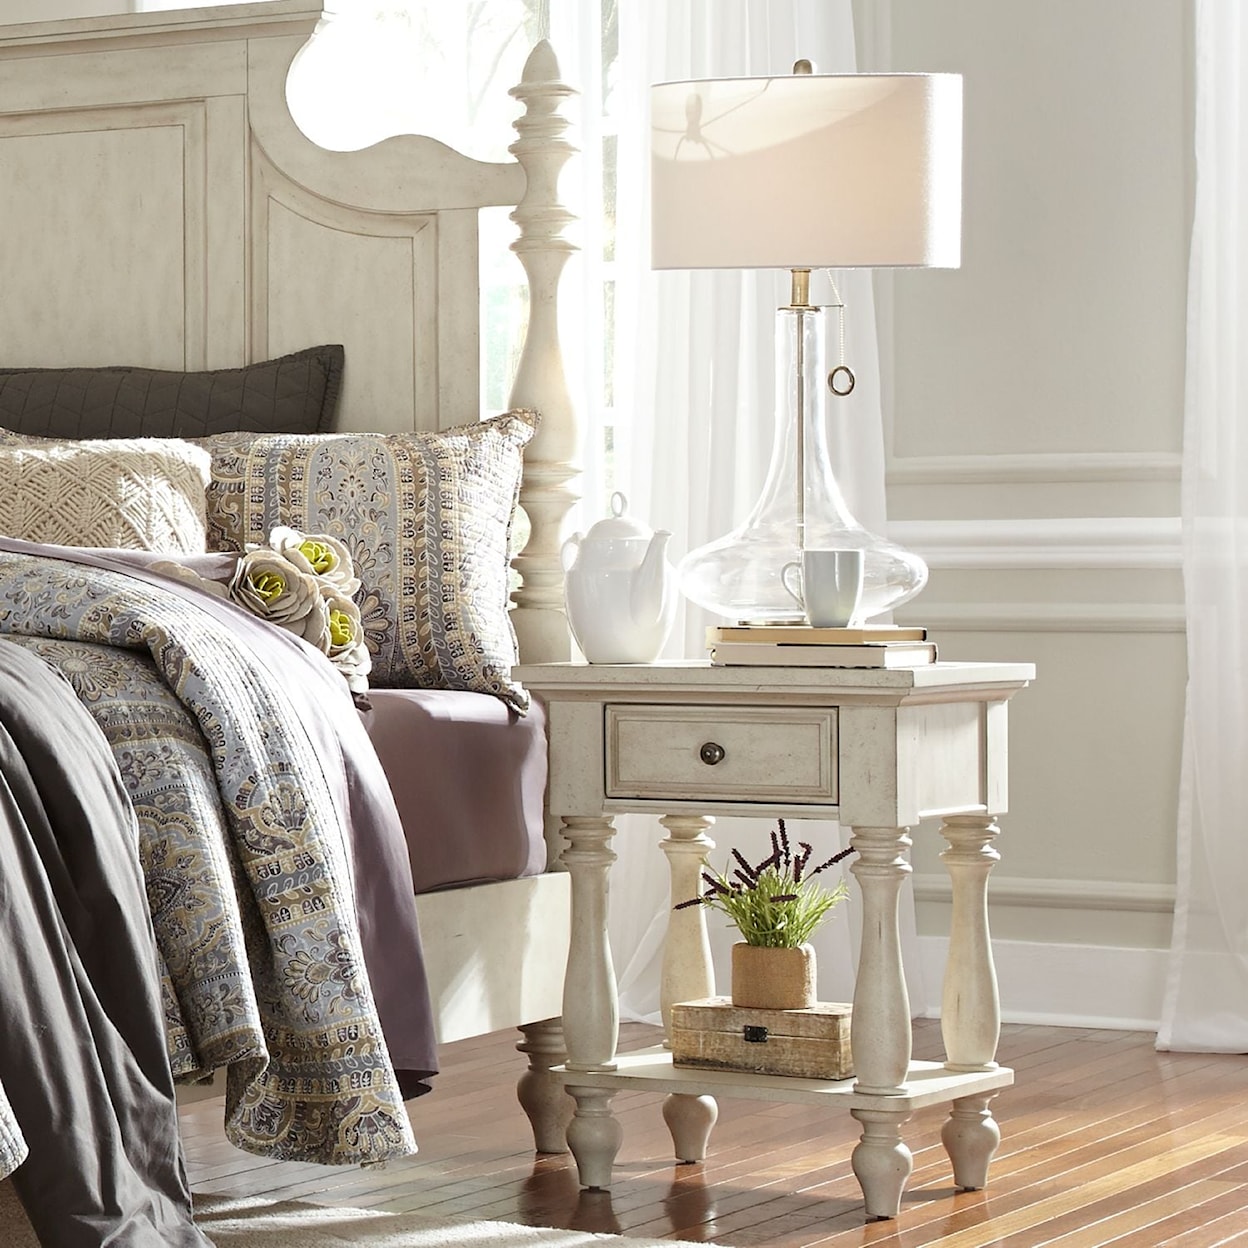 Liberty Furniture High Country Leg Night Stand